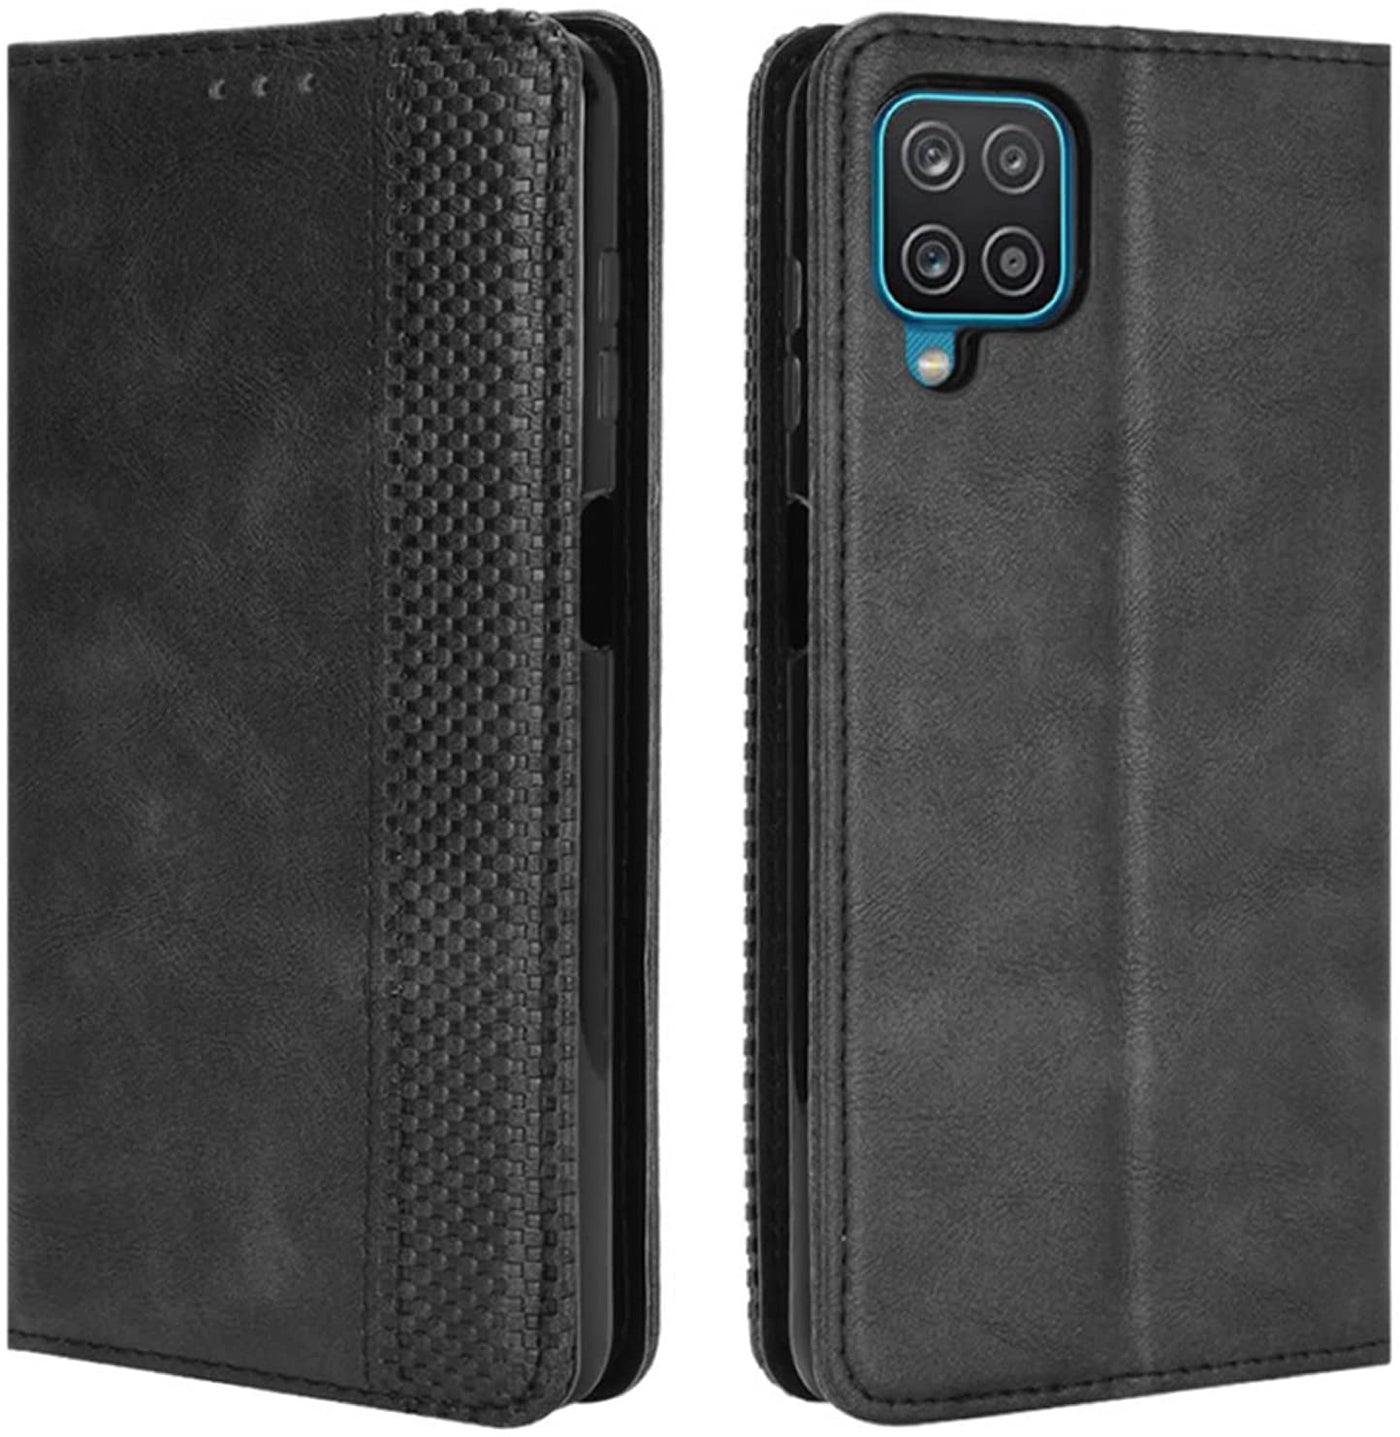 Samsung Galaxy M42 black color leather wallet flip cover case By excelsior